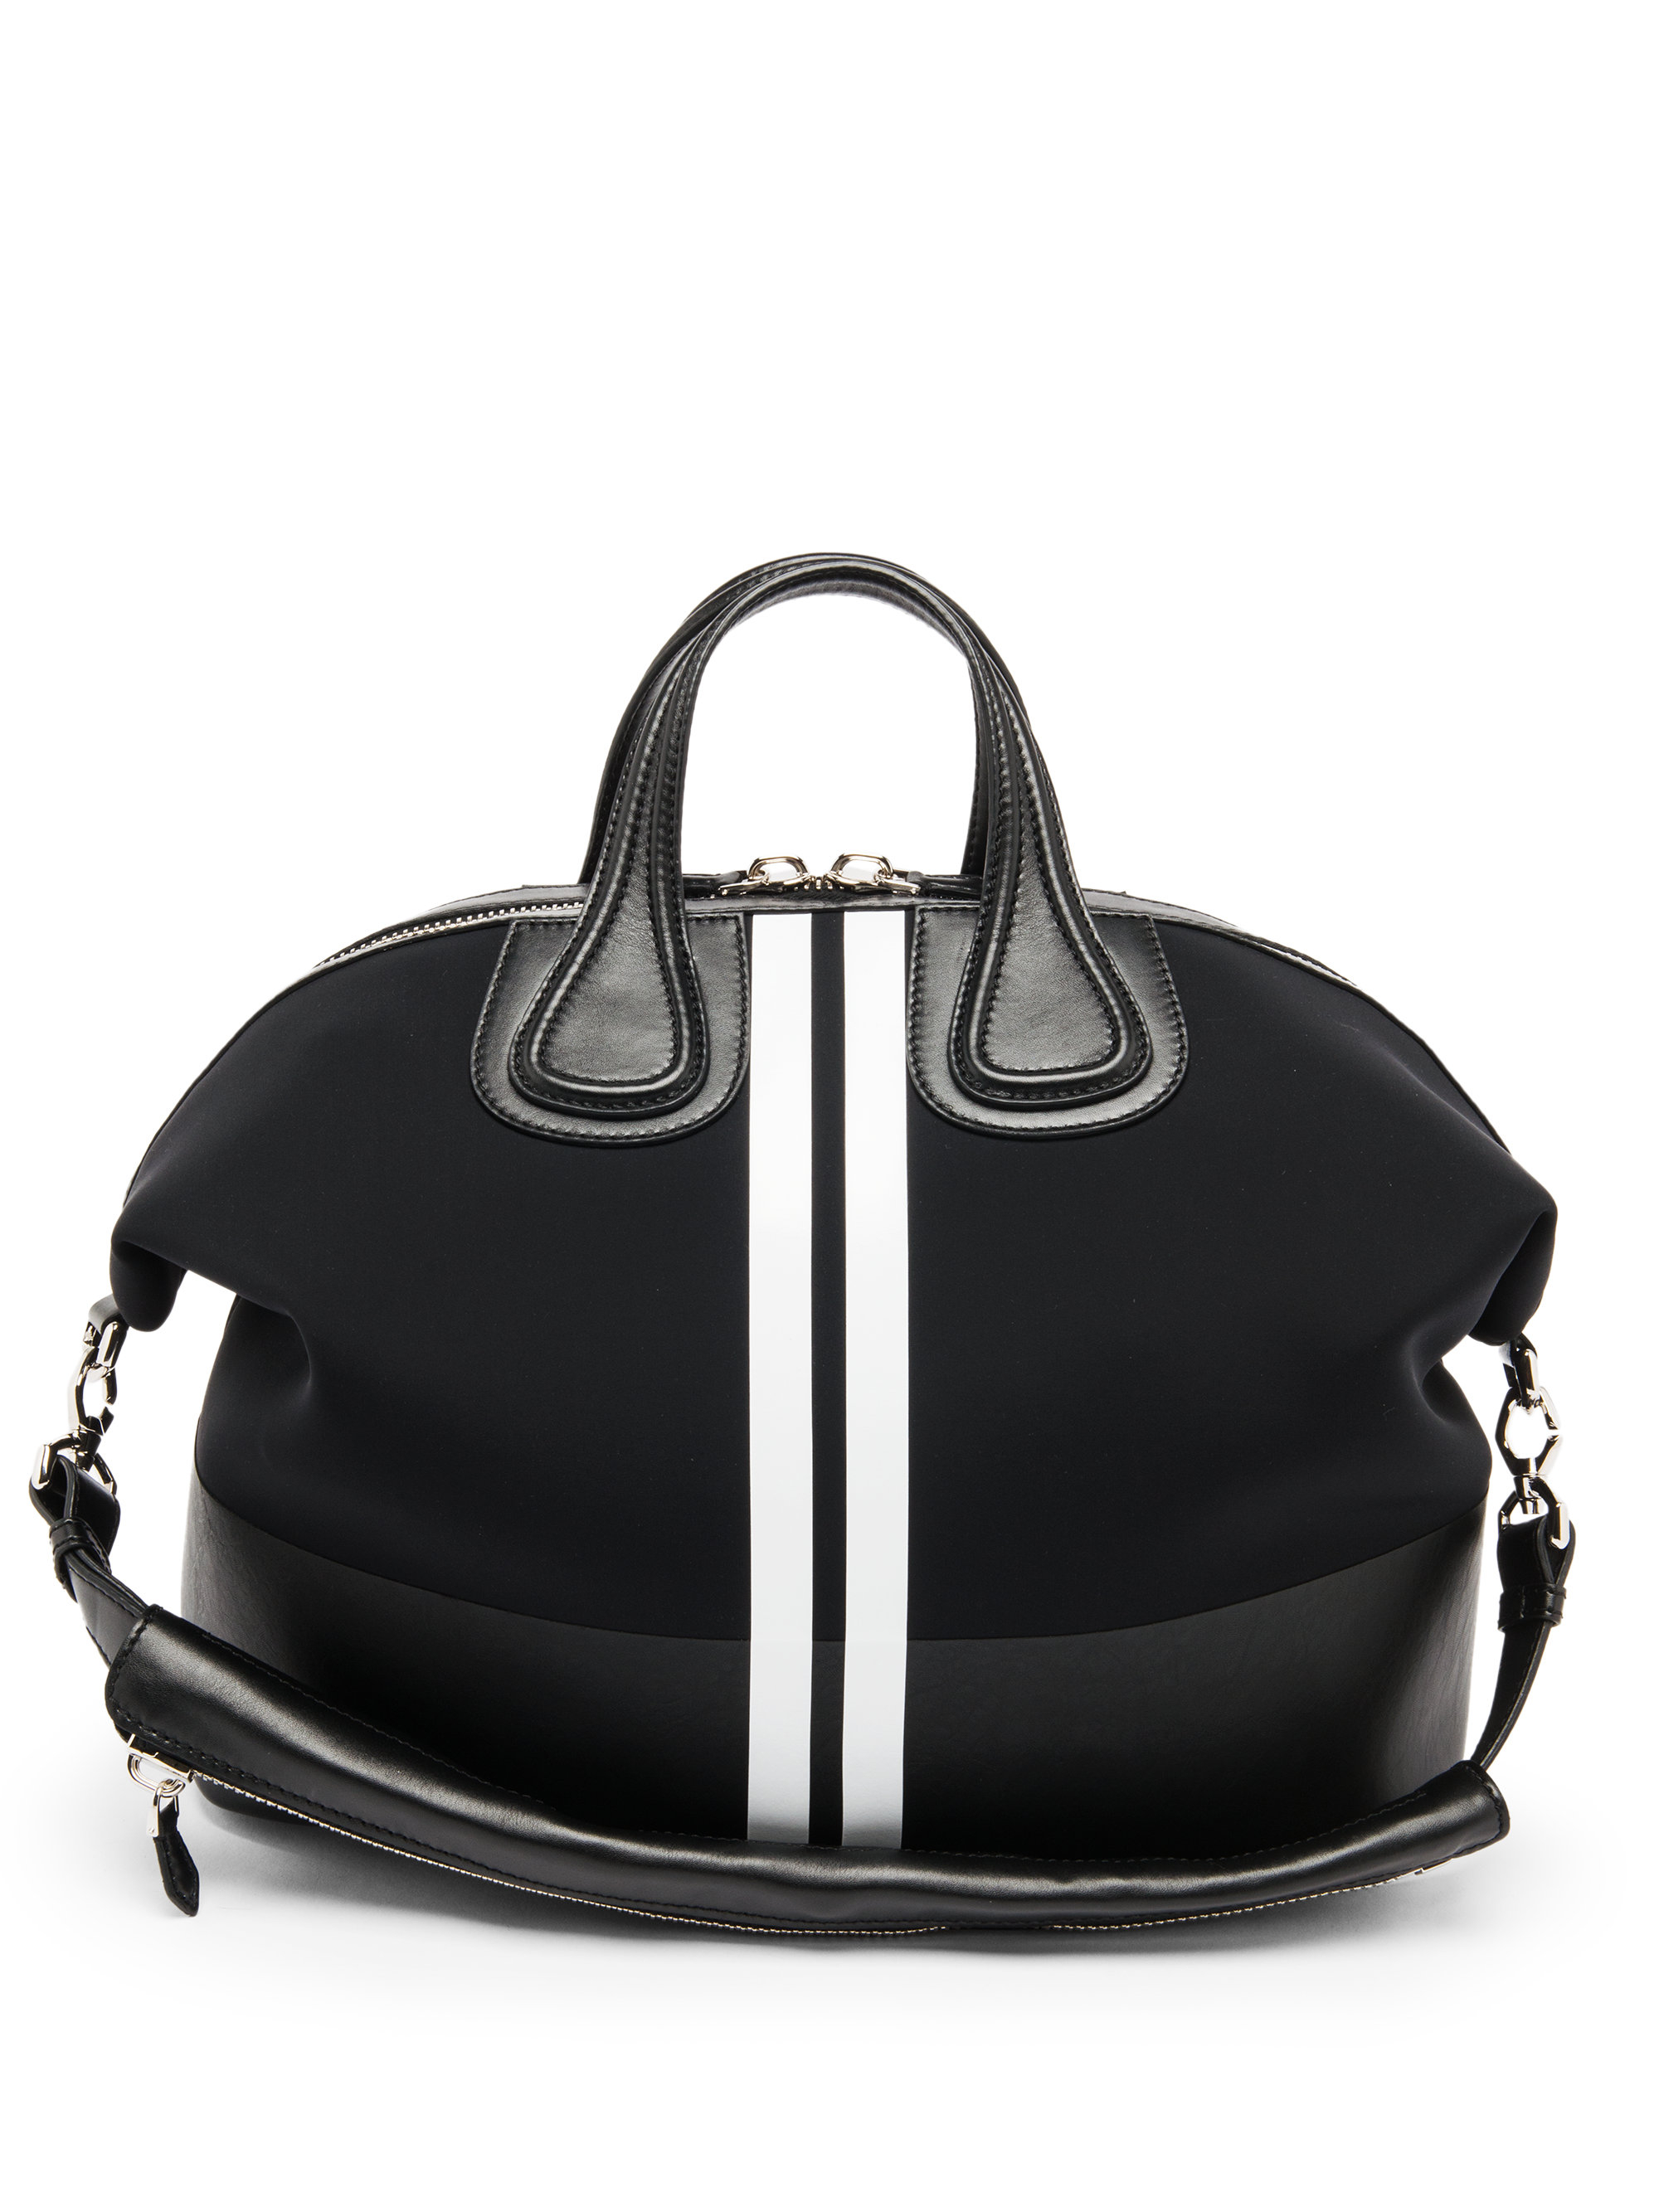 Lyst - Givenchy Nightingale Stripe Micro Satchel in Black